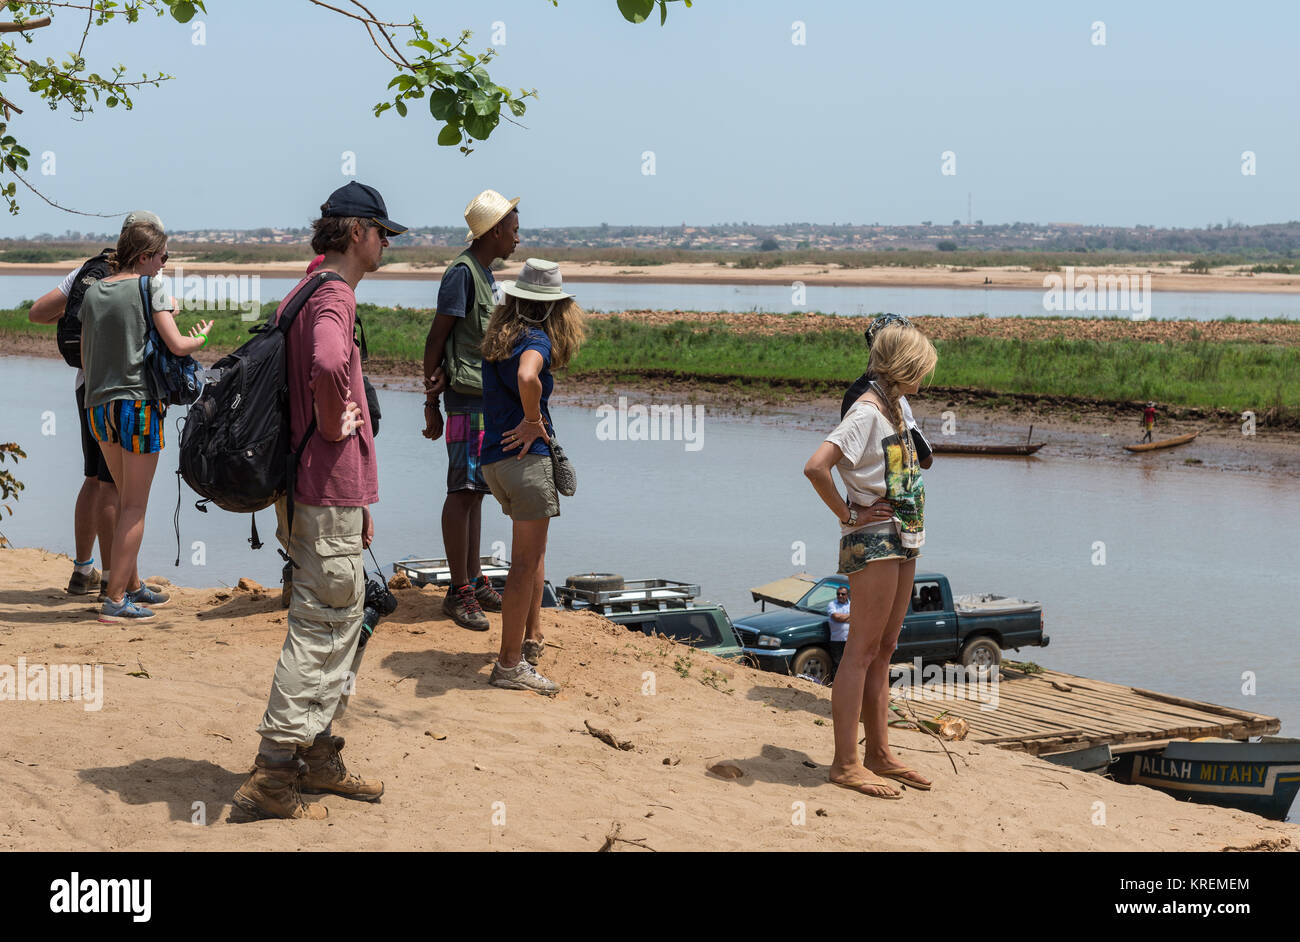 Passengers and western tourists waiting to board the ferry boat to cross Mania River. Madagascar, Africa. Stock Photo